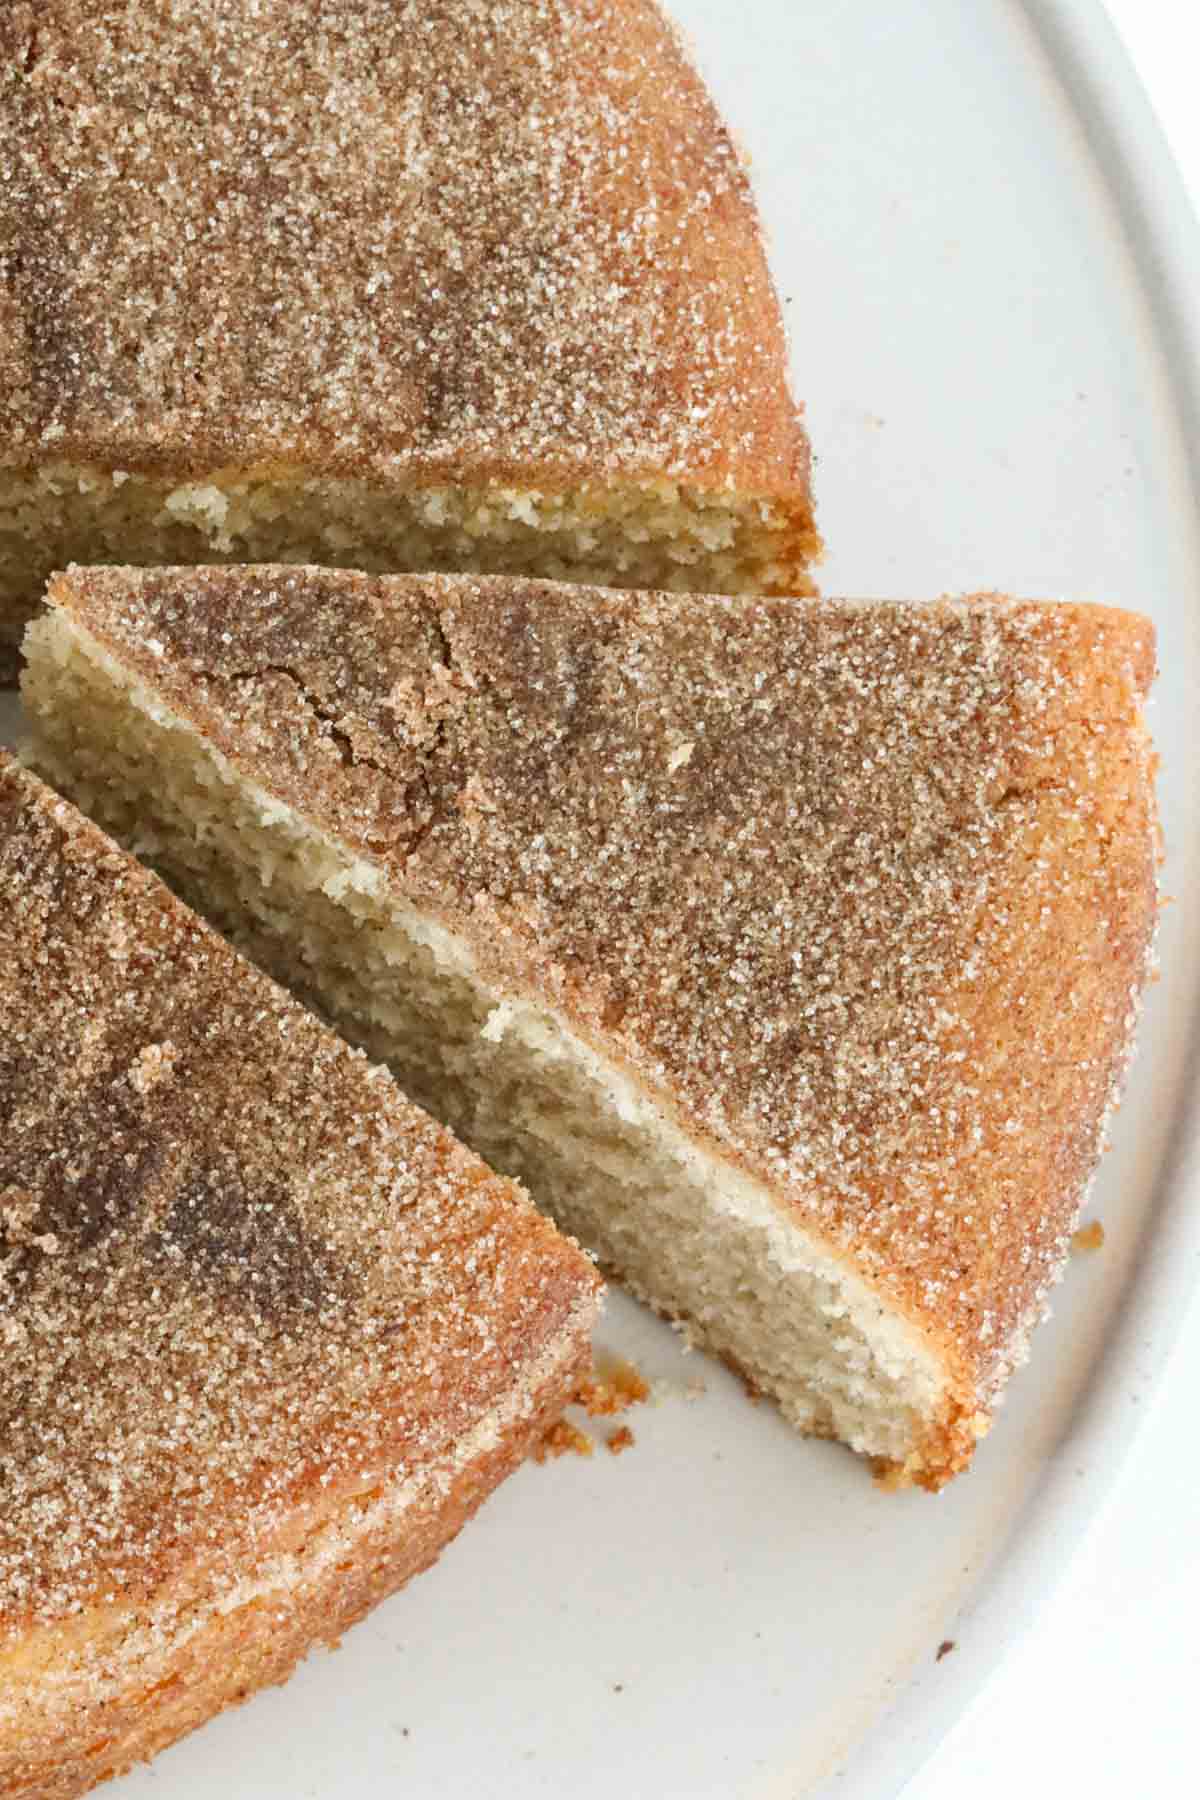 An overhead shot of the cinnamon tea cake showing its sugary topping.